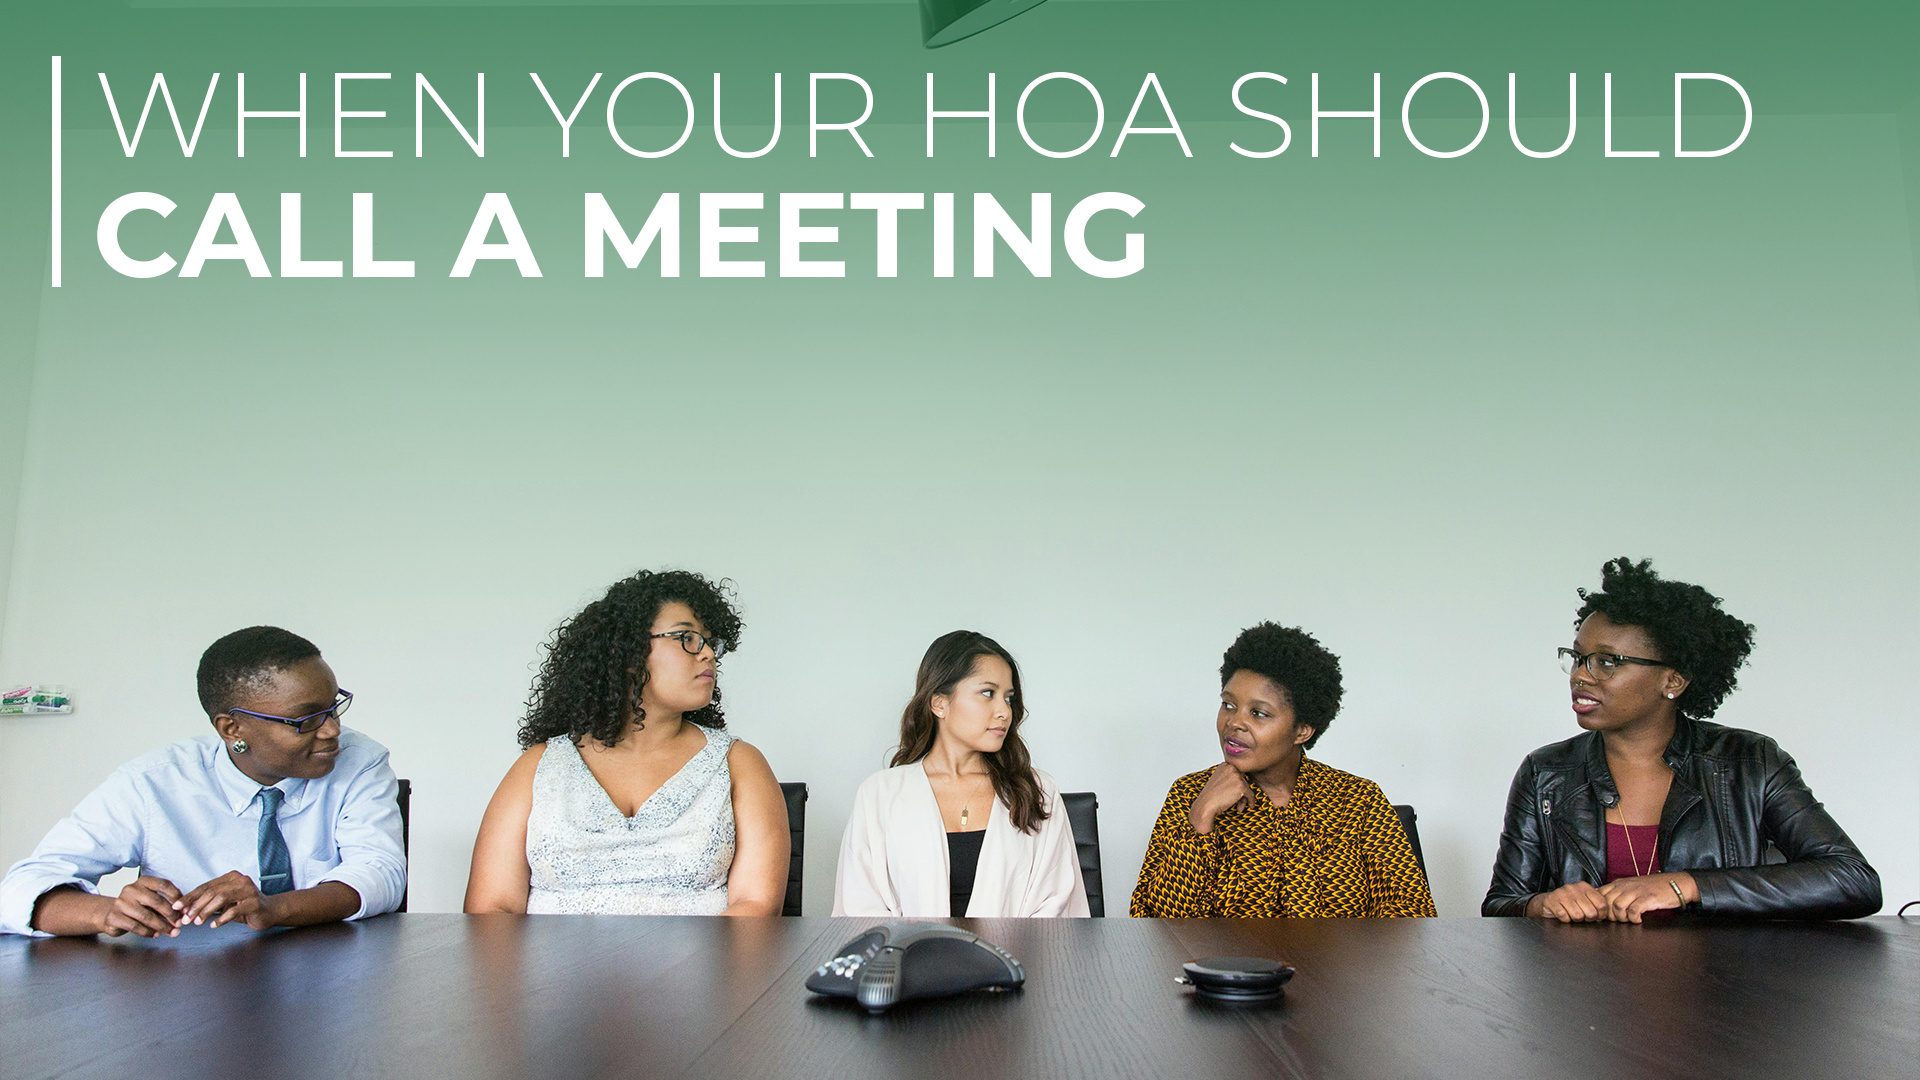 When Your HOA Should Call a Meeting